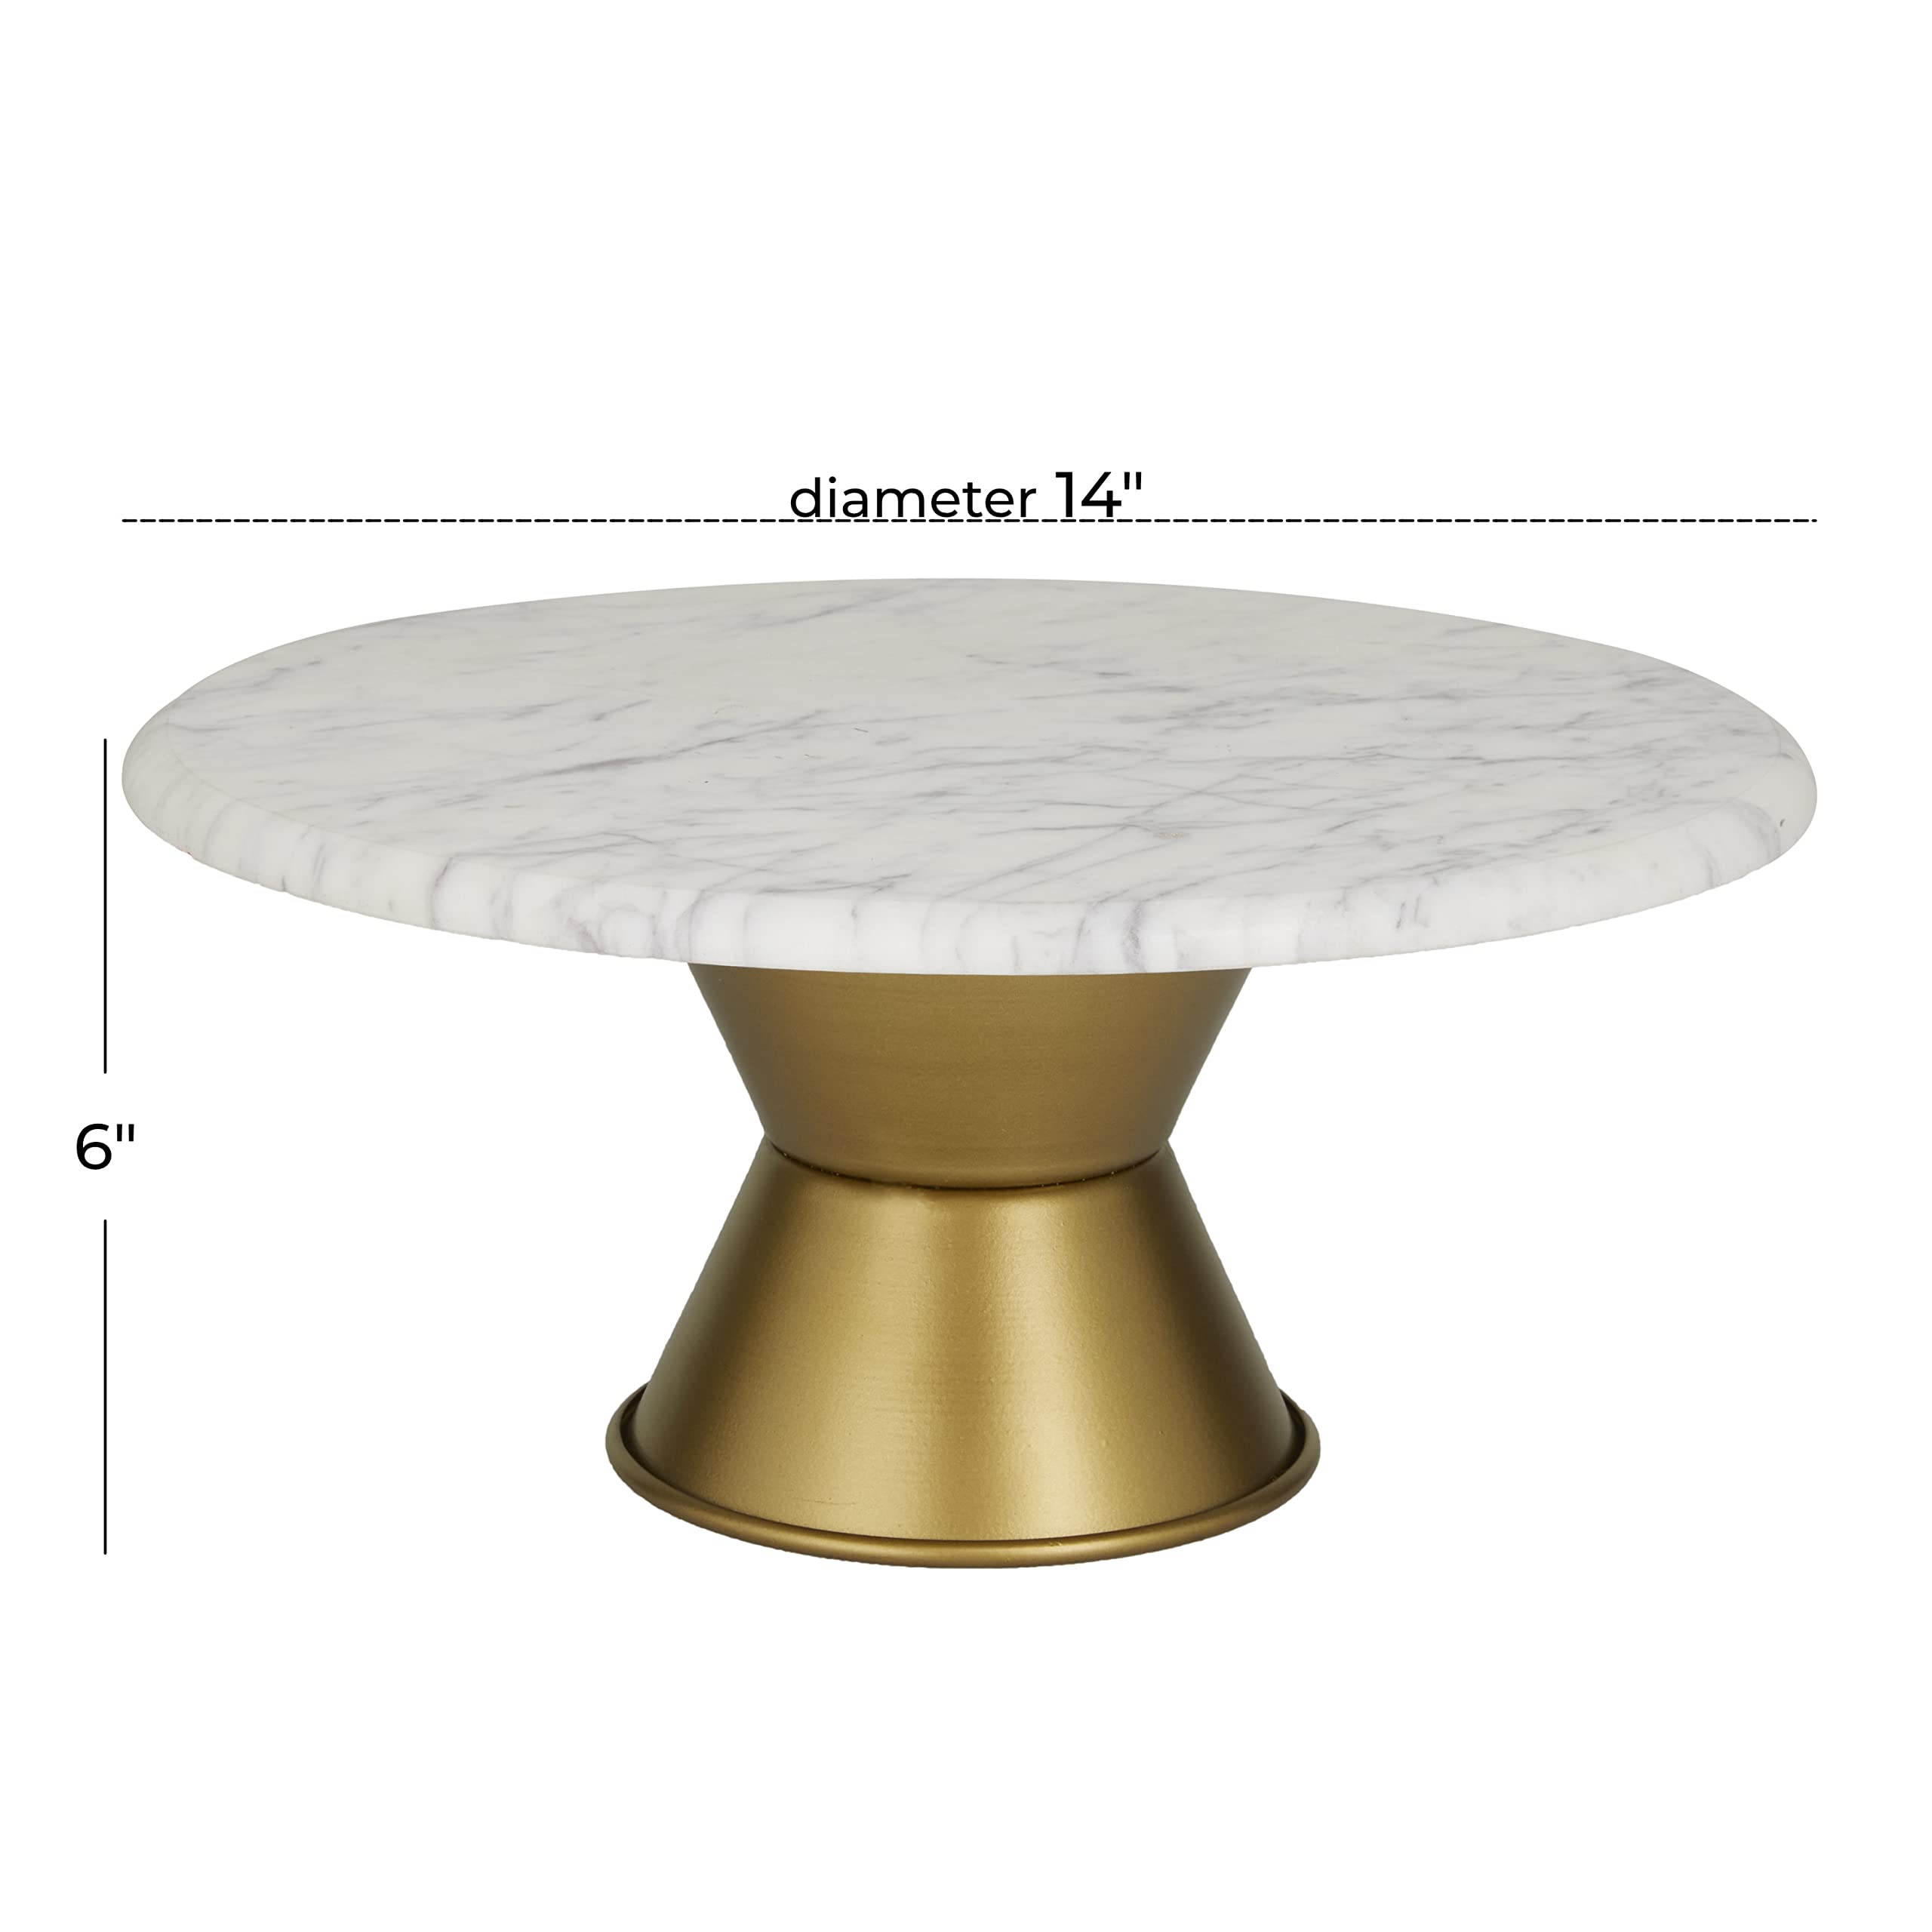 CosmoLiving by Cosmopolitan Ceramic Cake Stand with Gold Base, 14" x 14" x 6", White